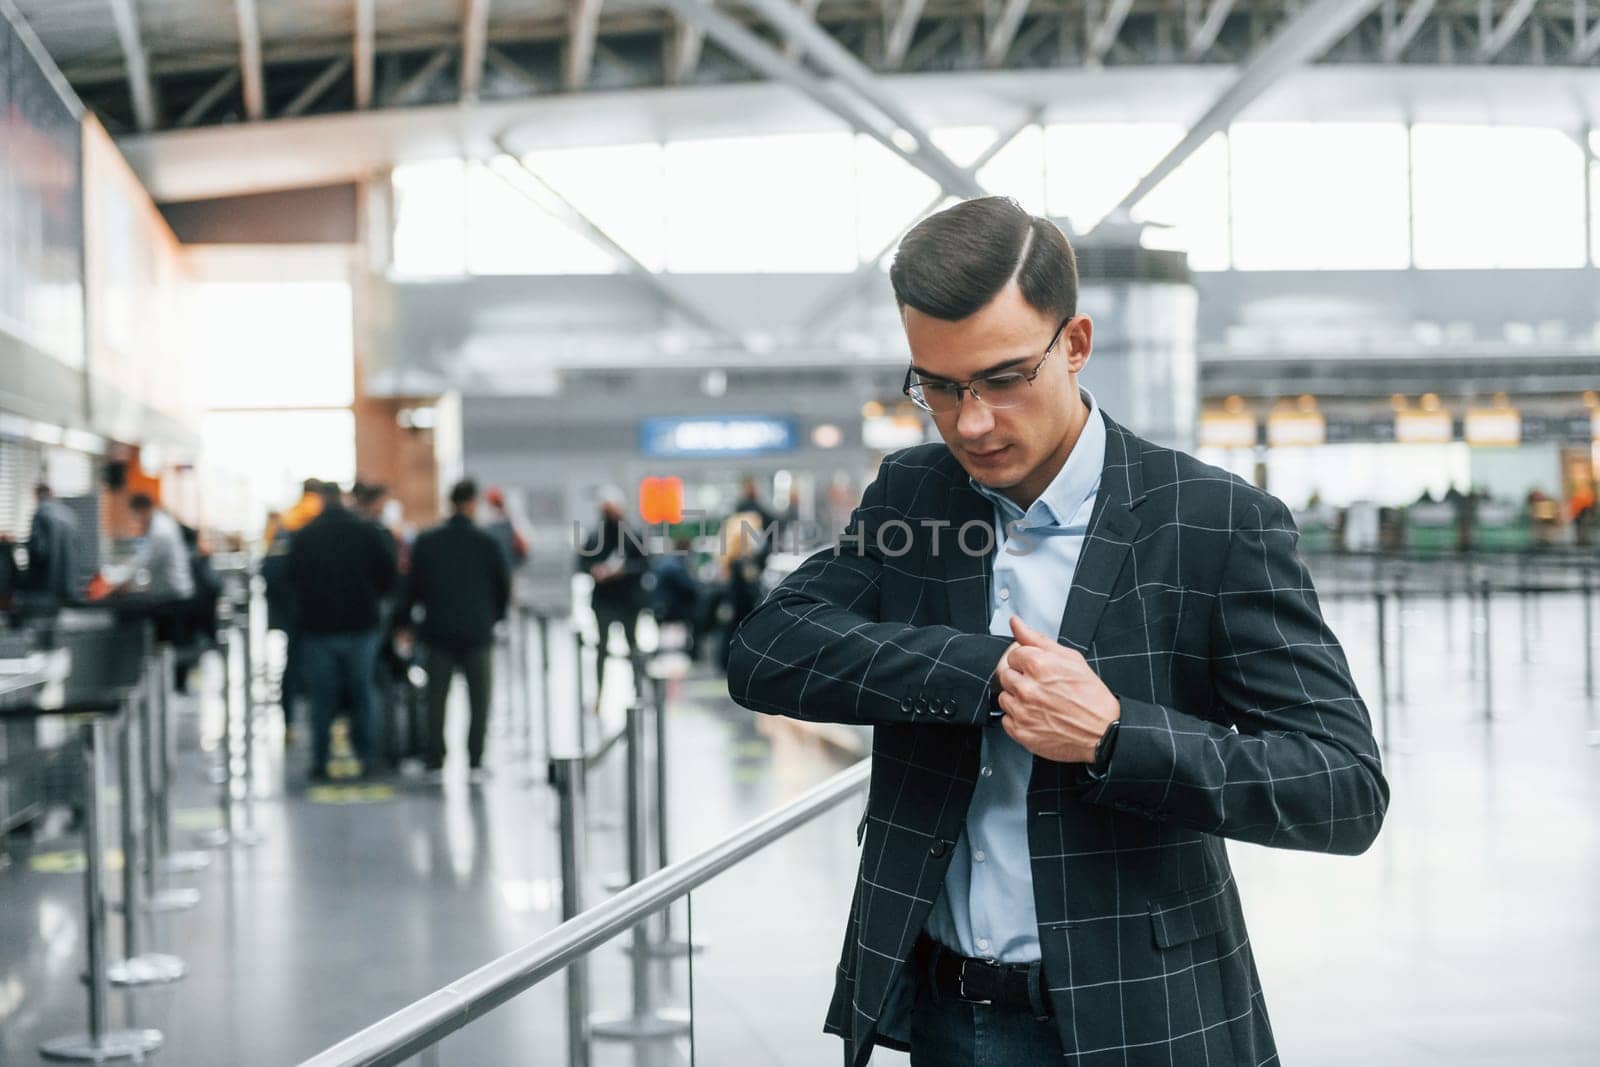 Taking out the documents. Young businessman in formal clothes is in the airport at daytime.